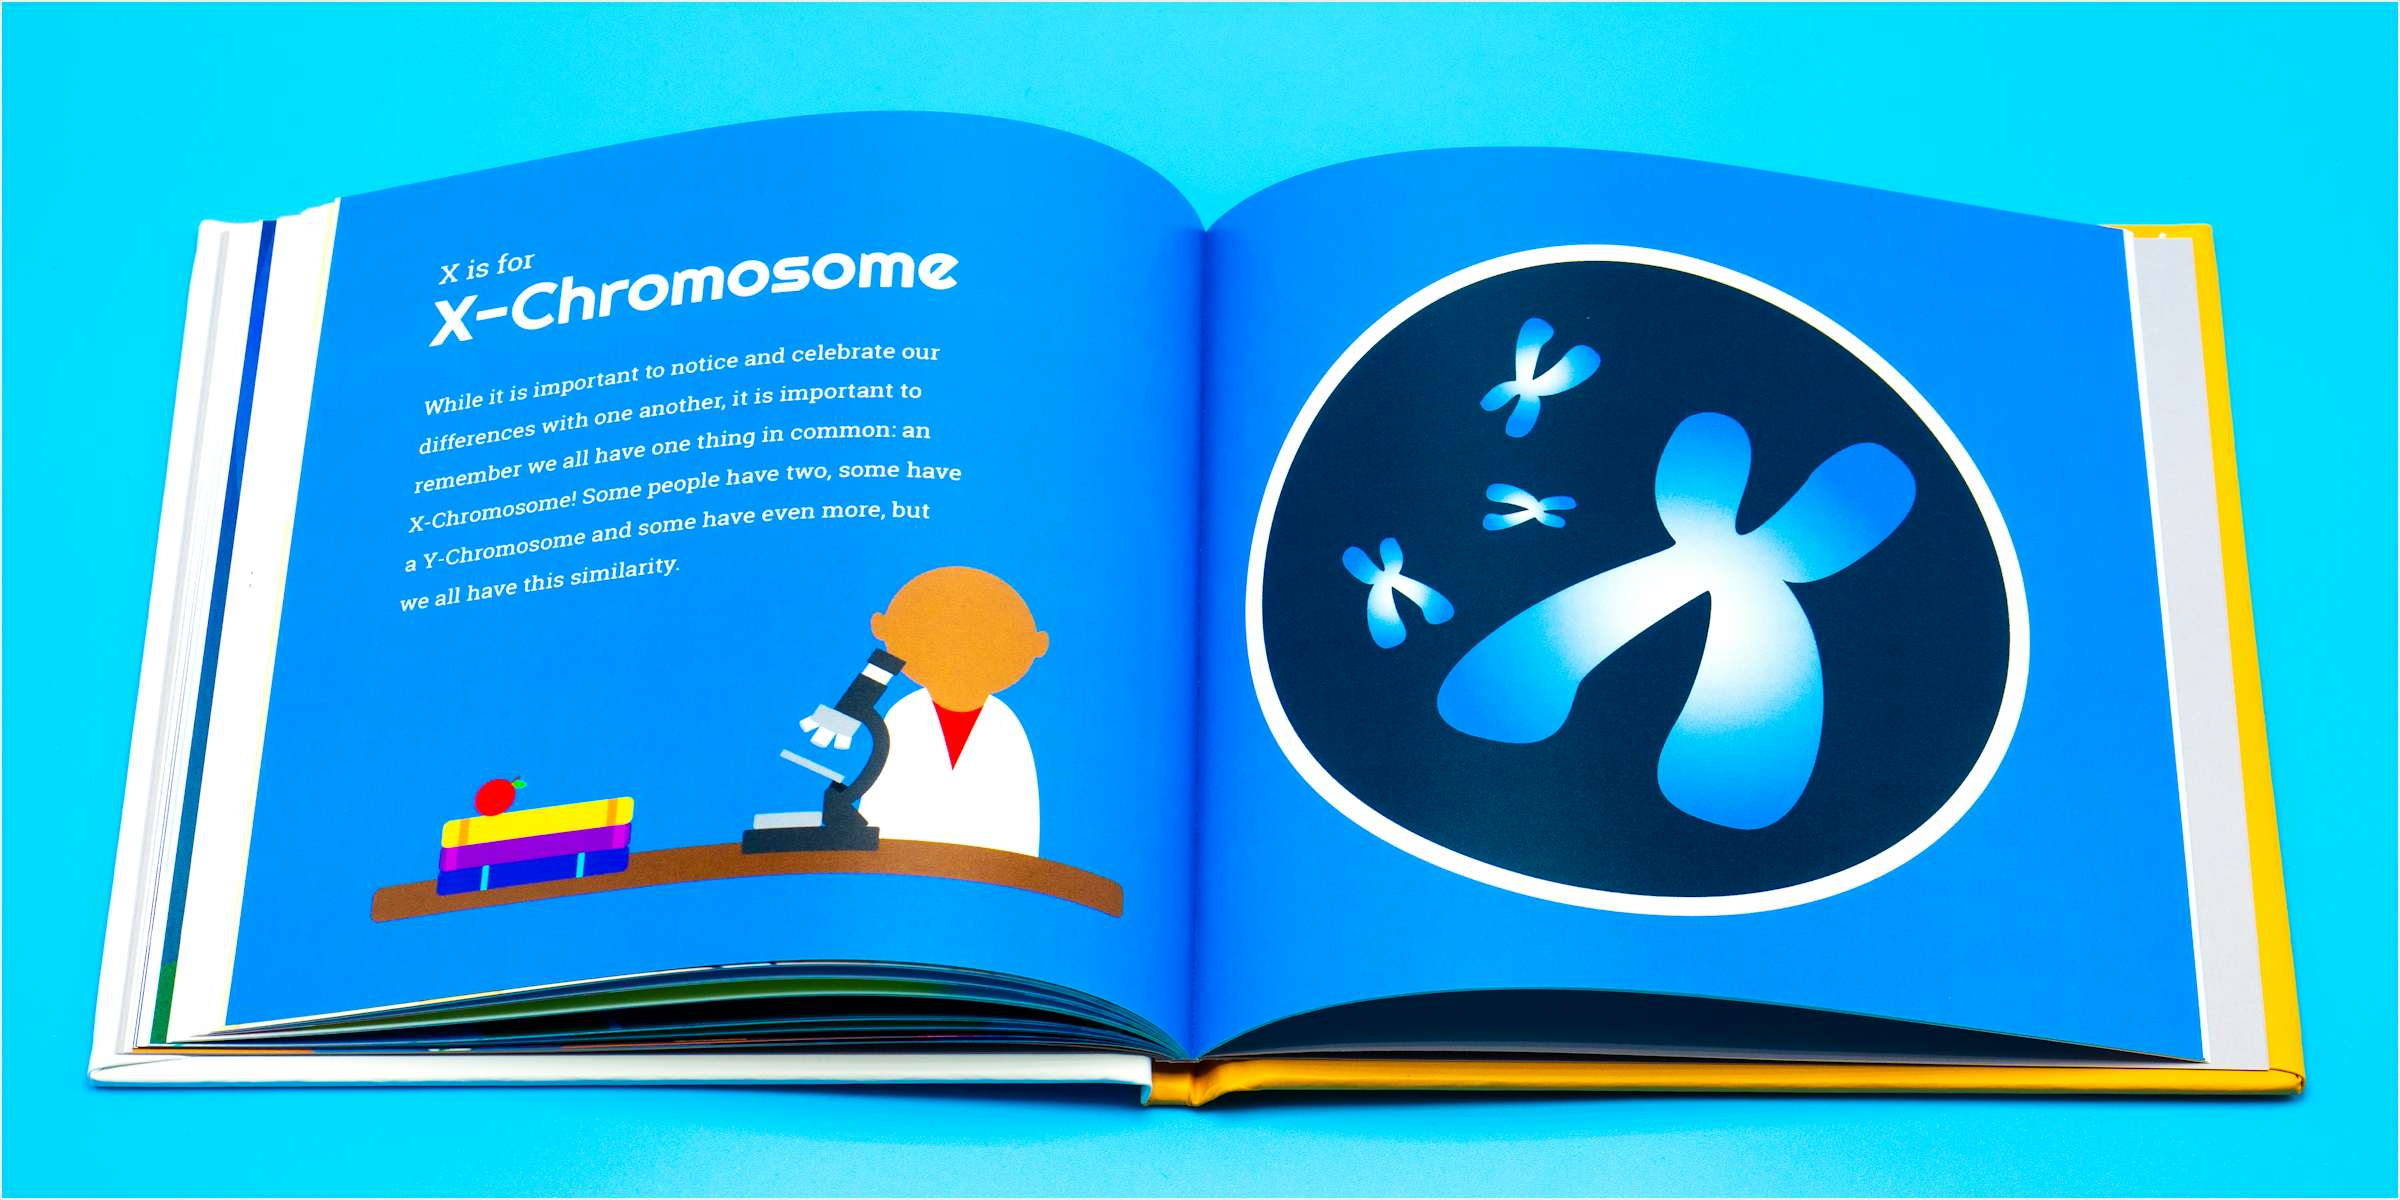 X is for X-Chromosome